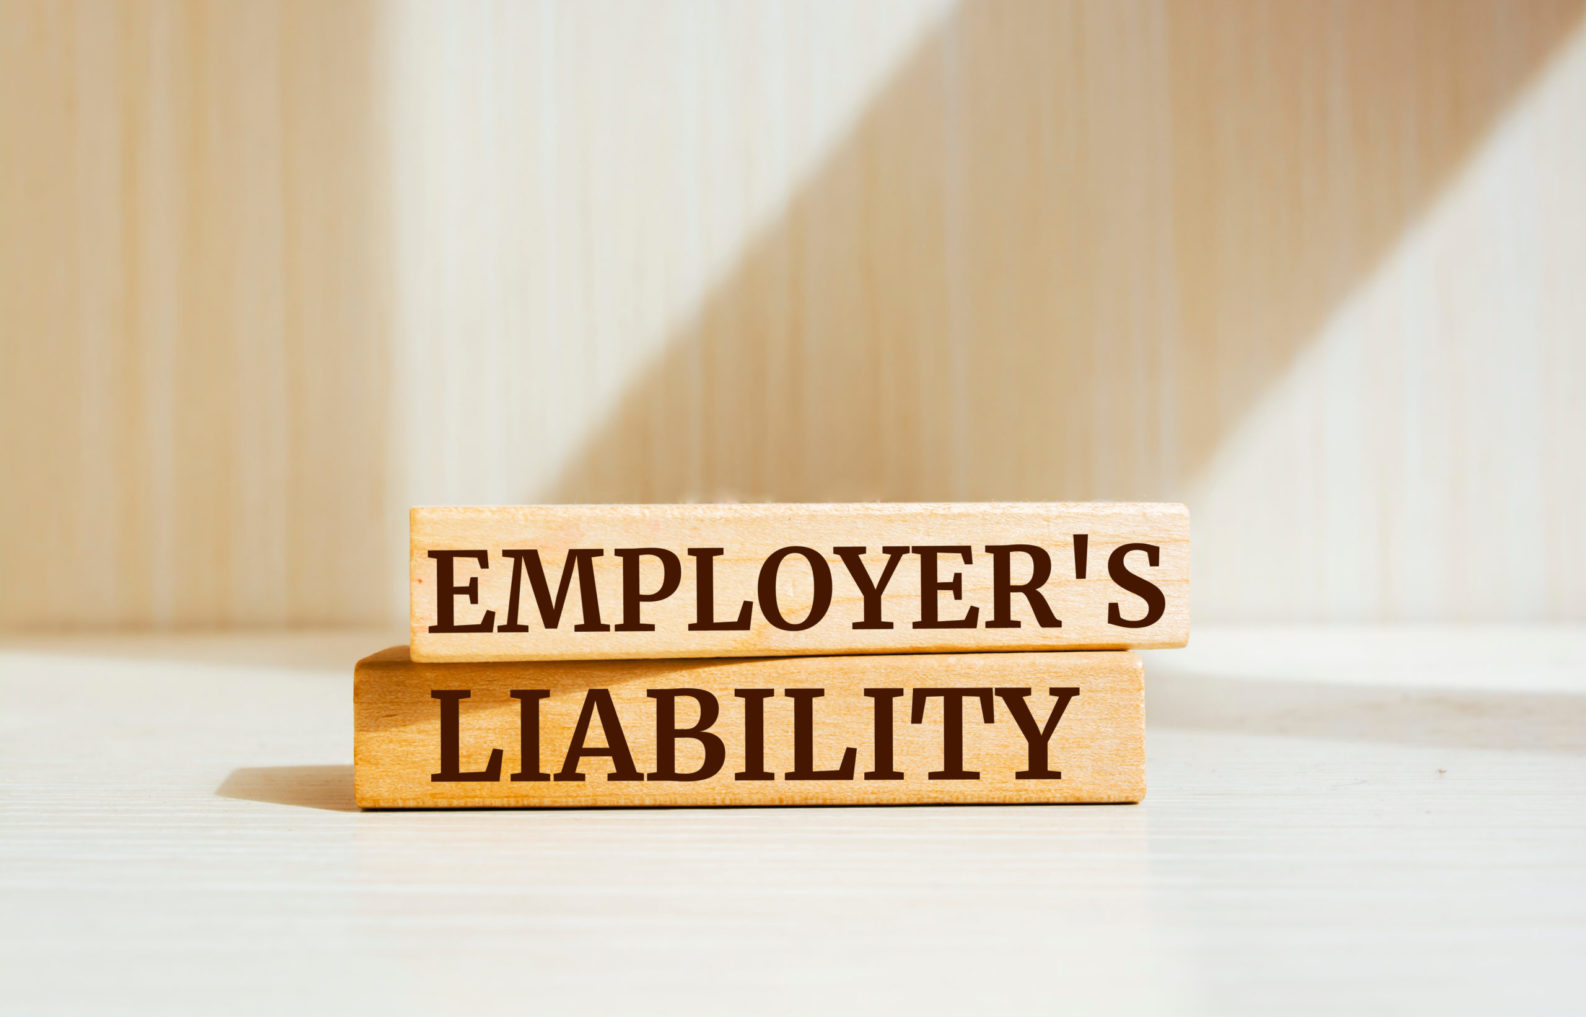 Wooden blocks with words 'EMPLOYER'S LIABILITY'. Business concep